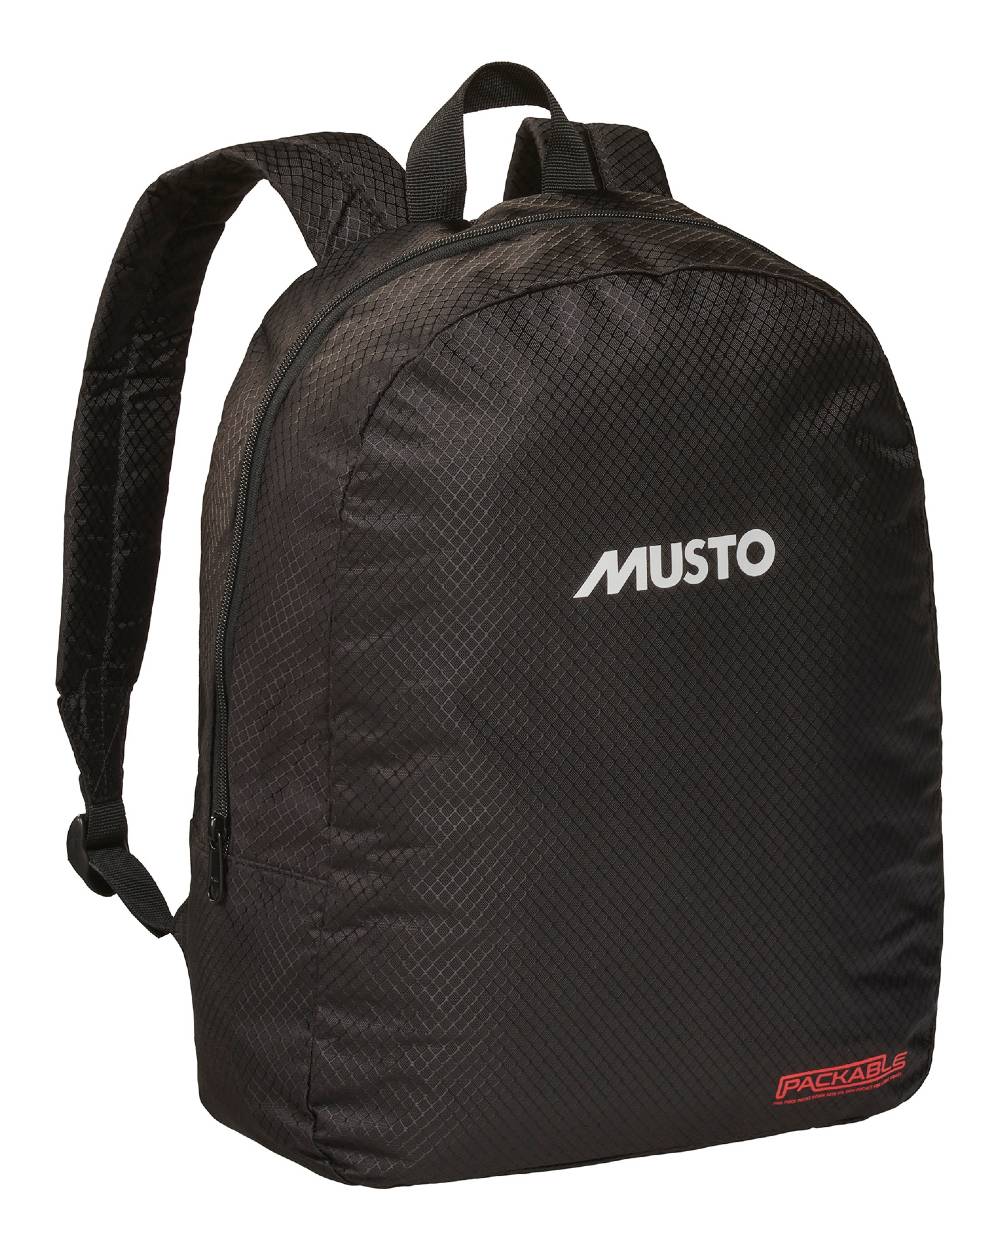 Black Coloured Musto Packable Backpack On A White Background